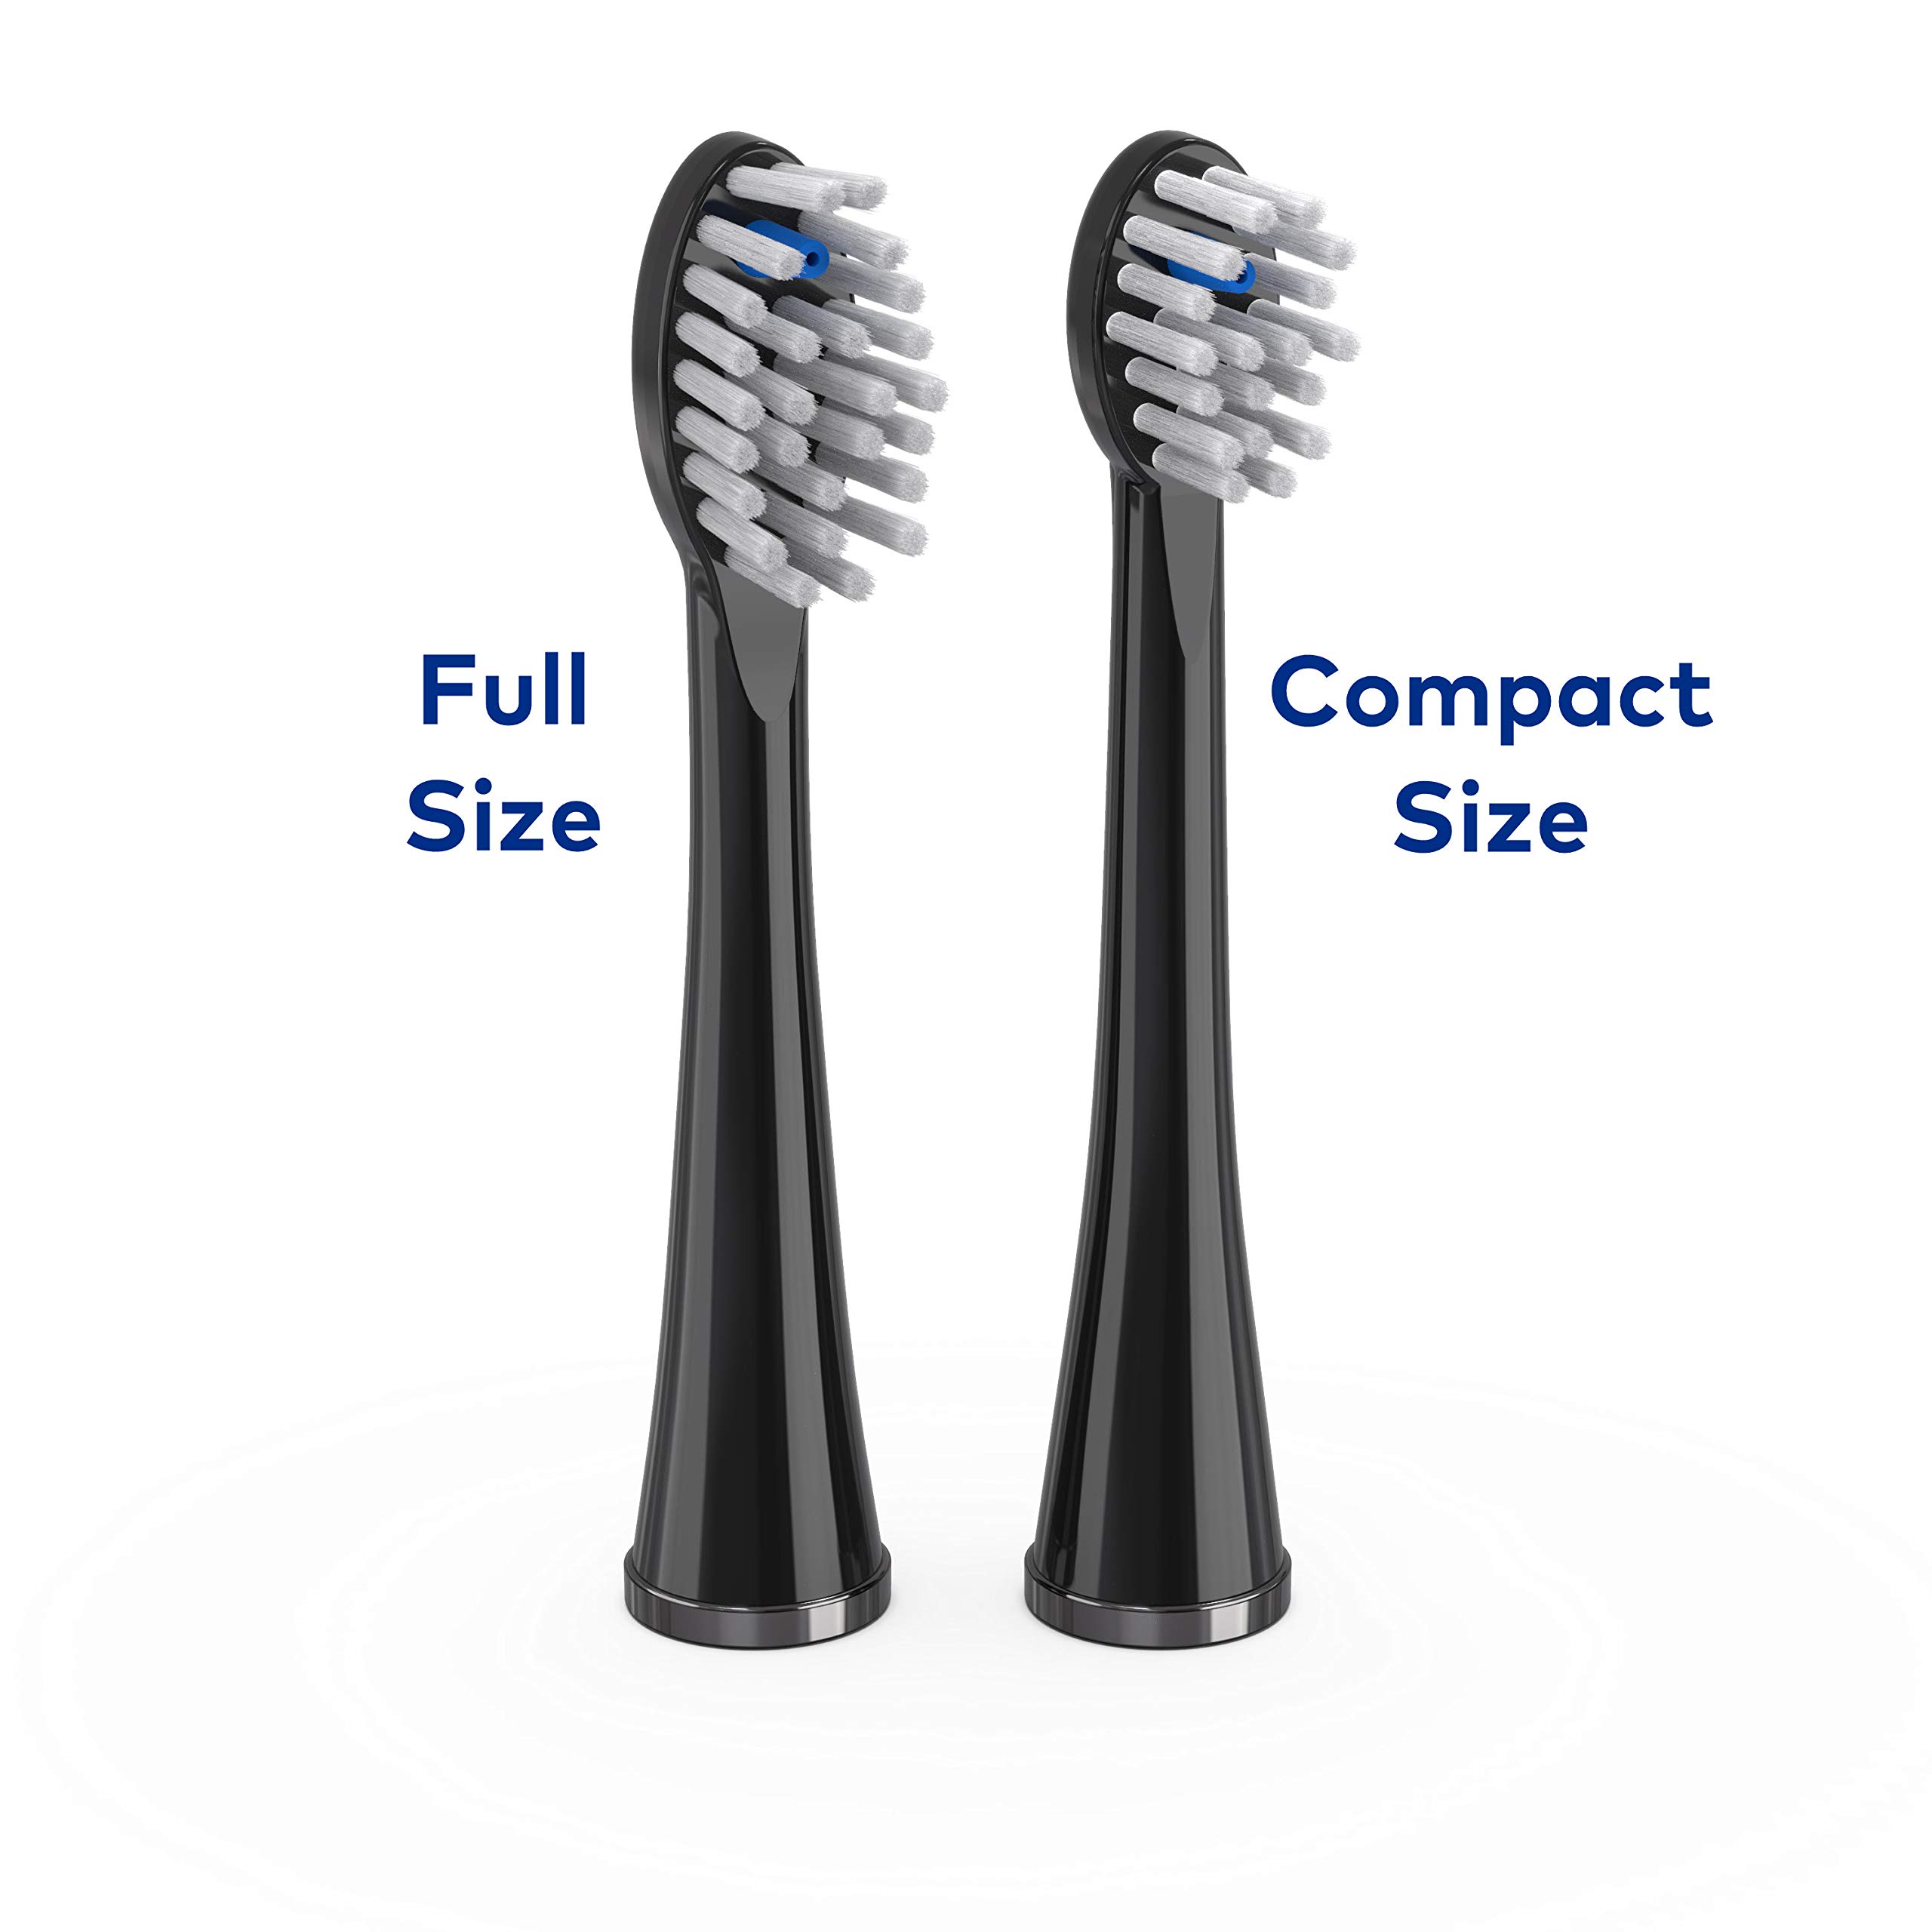 Waterpik Full Size Replacement Brush Heads With Covers for Sonic-Fusion Flossing Toothbrush SFFB-2EB, 2 Count Black